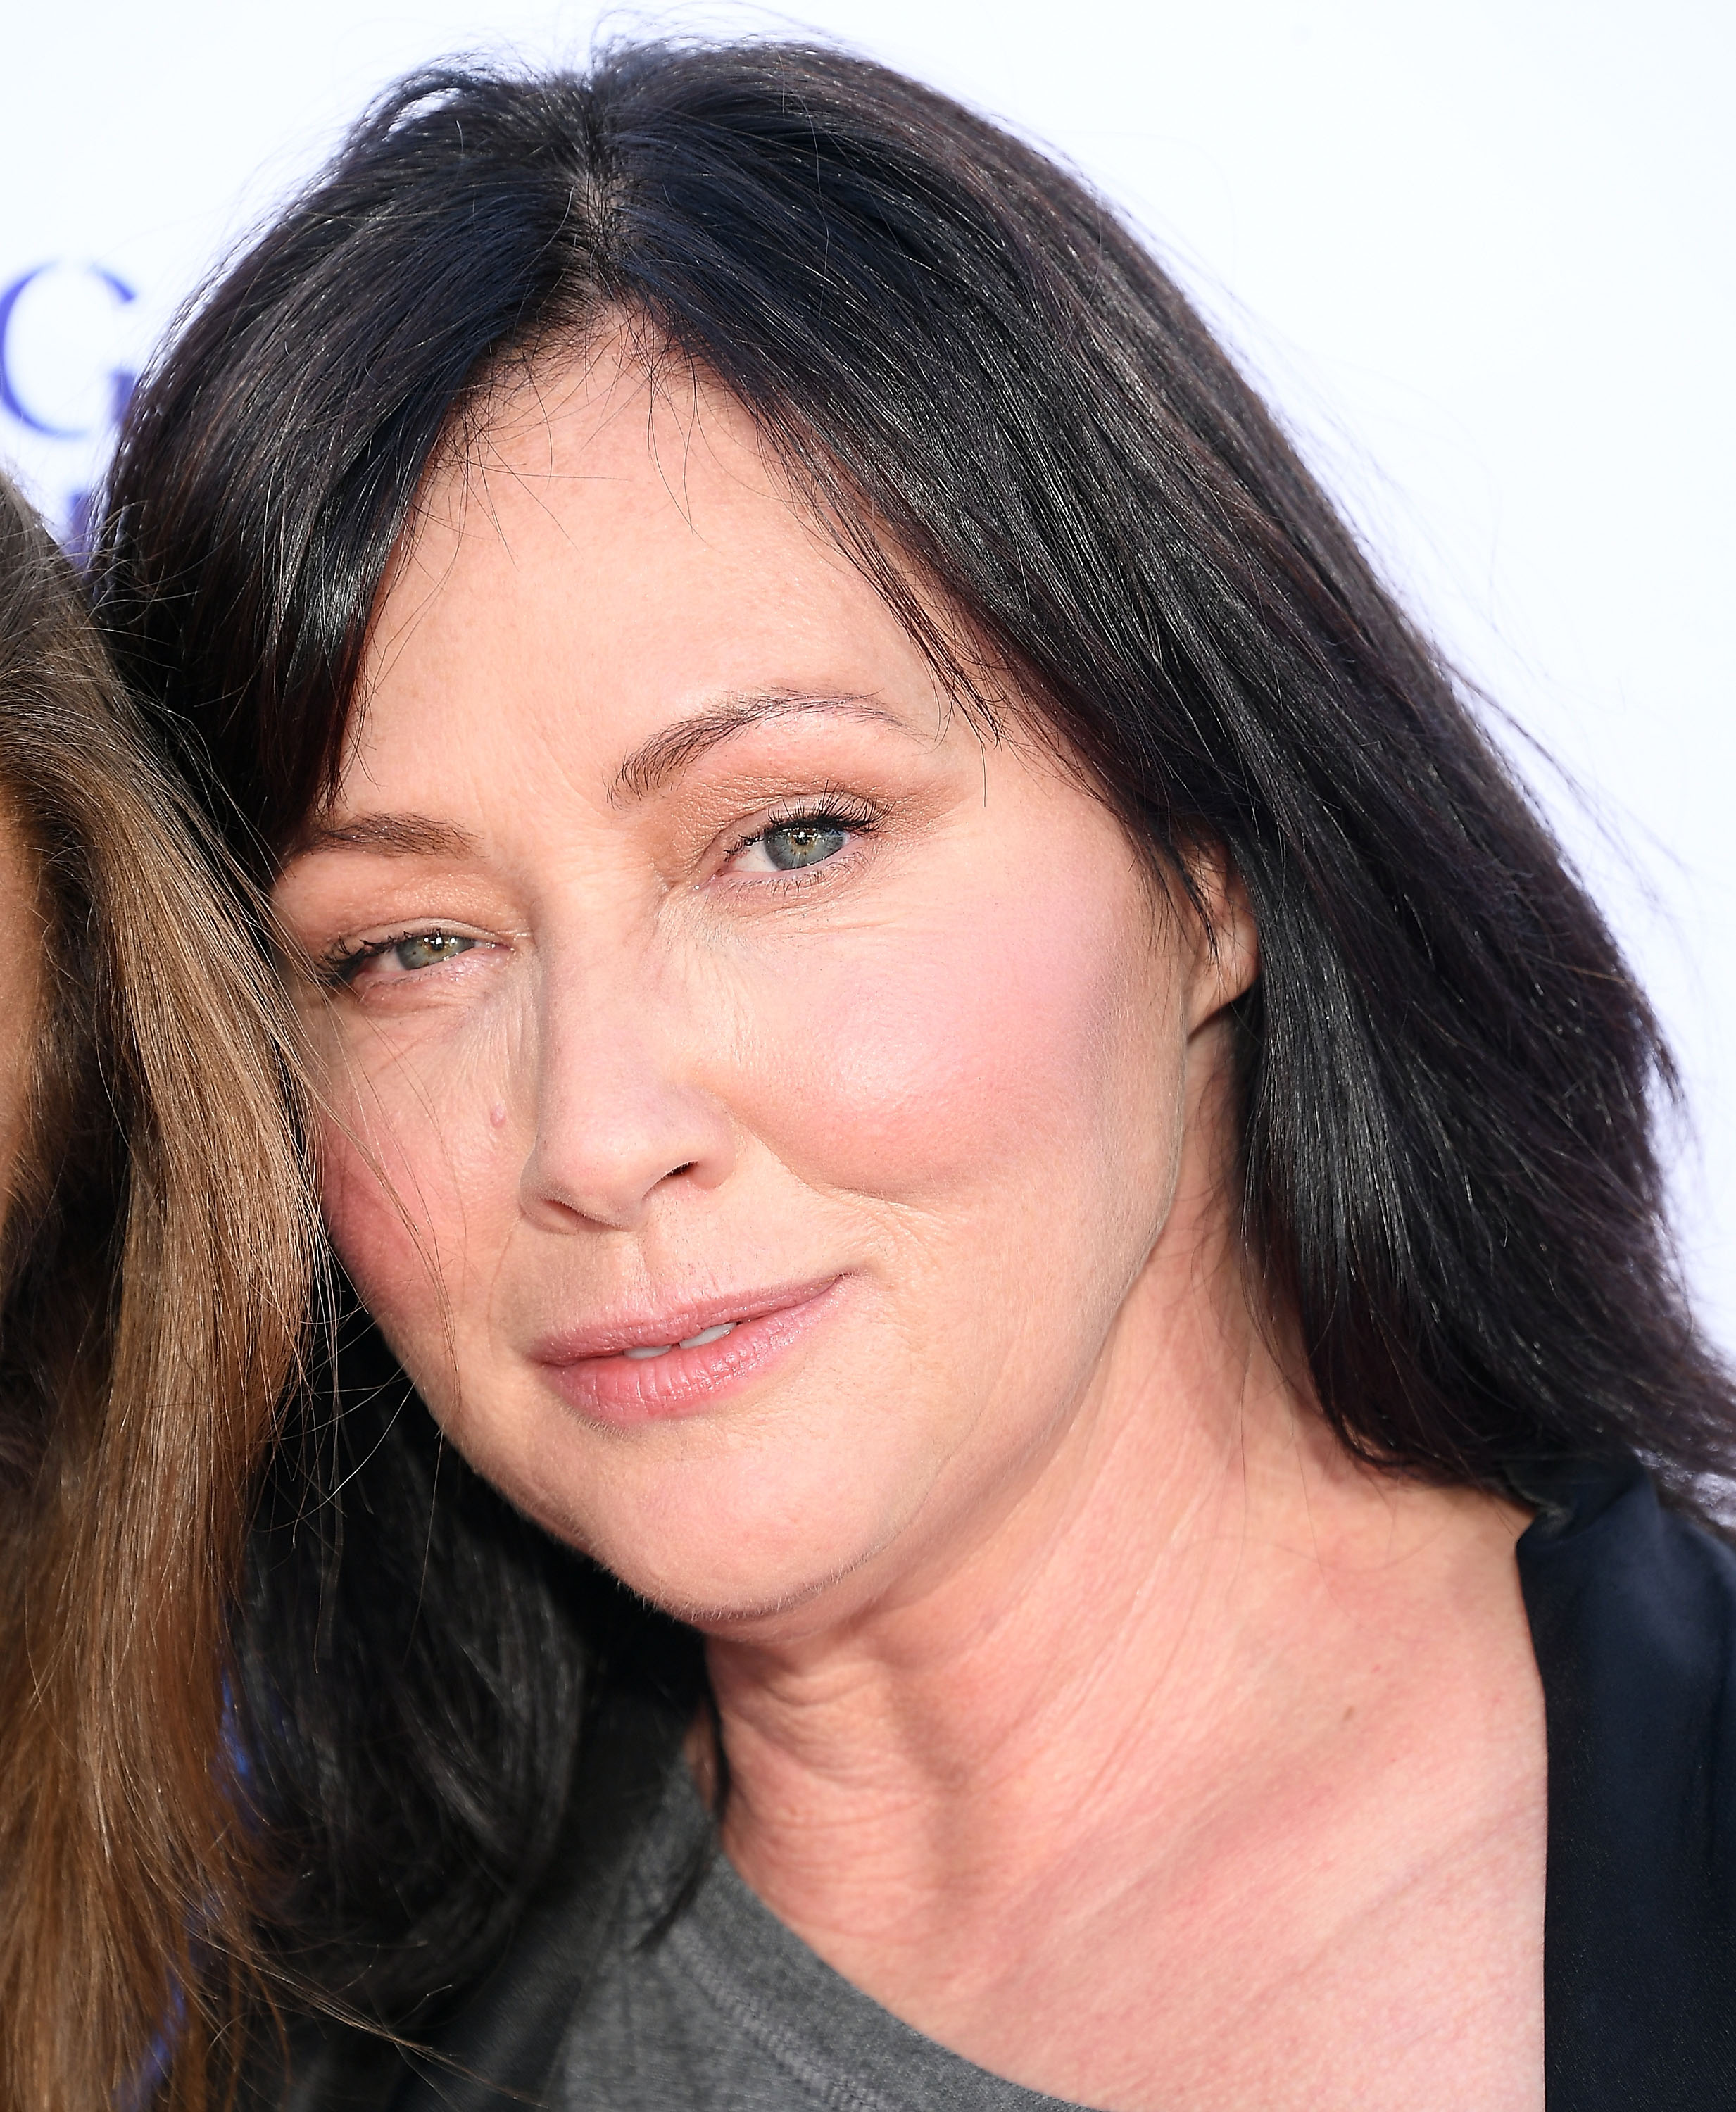 Shannen Doherty kommt am 7. September 2018 zum Stand Up To Cancer Marks 10 Years Of Impact In Cancer Research in Santa Monica, Kalifornien. | Quelle: Getty Images